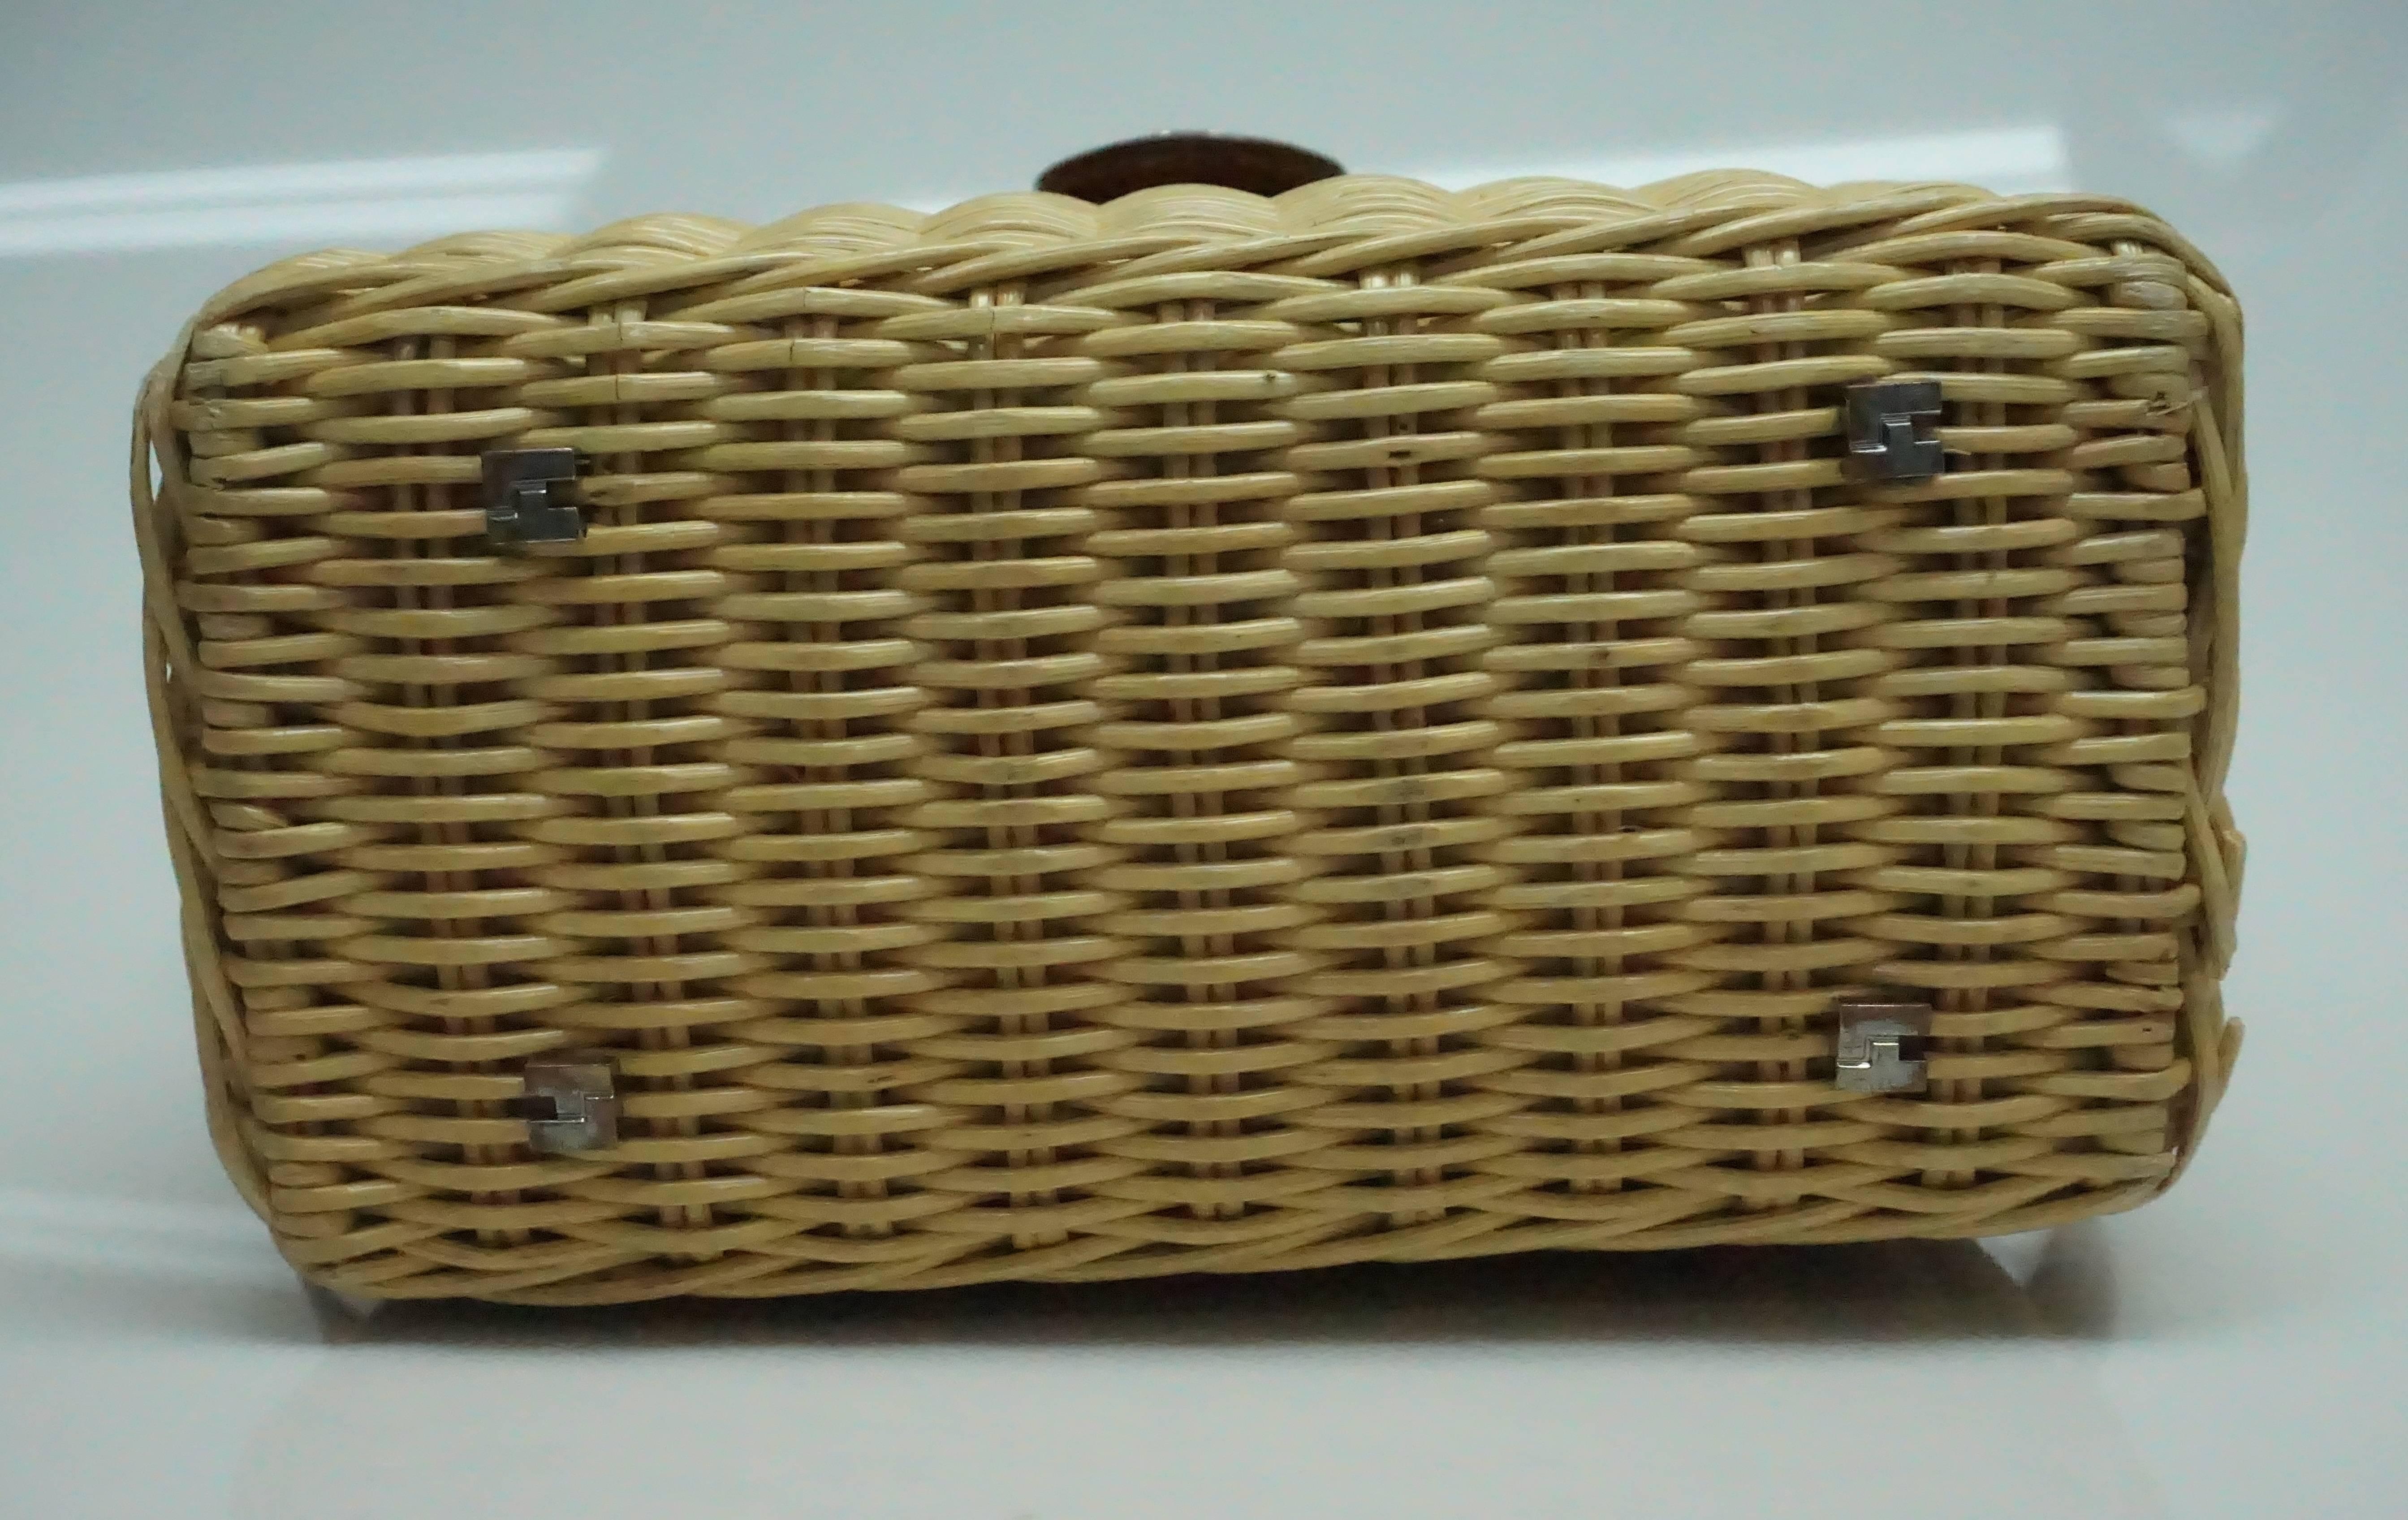 Lambertson Truex Wicker and Brown Leather Handbag In Good Condition For Sale In West Palm Beach, FL